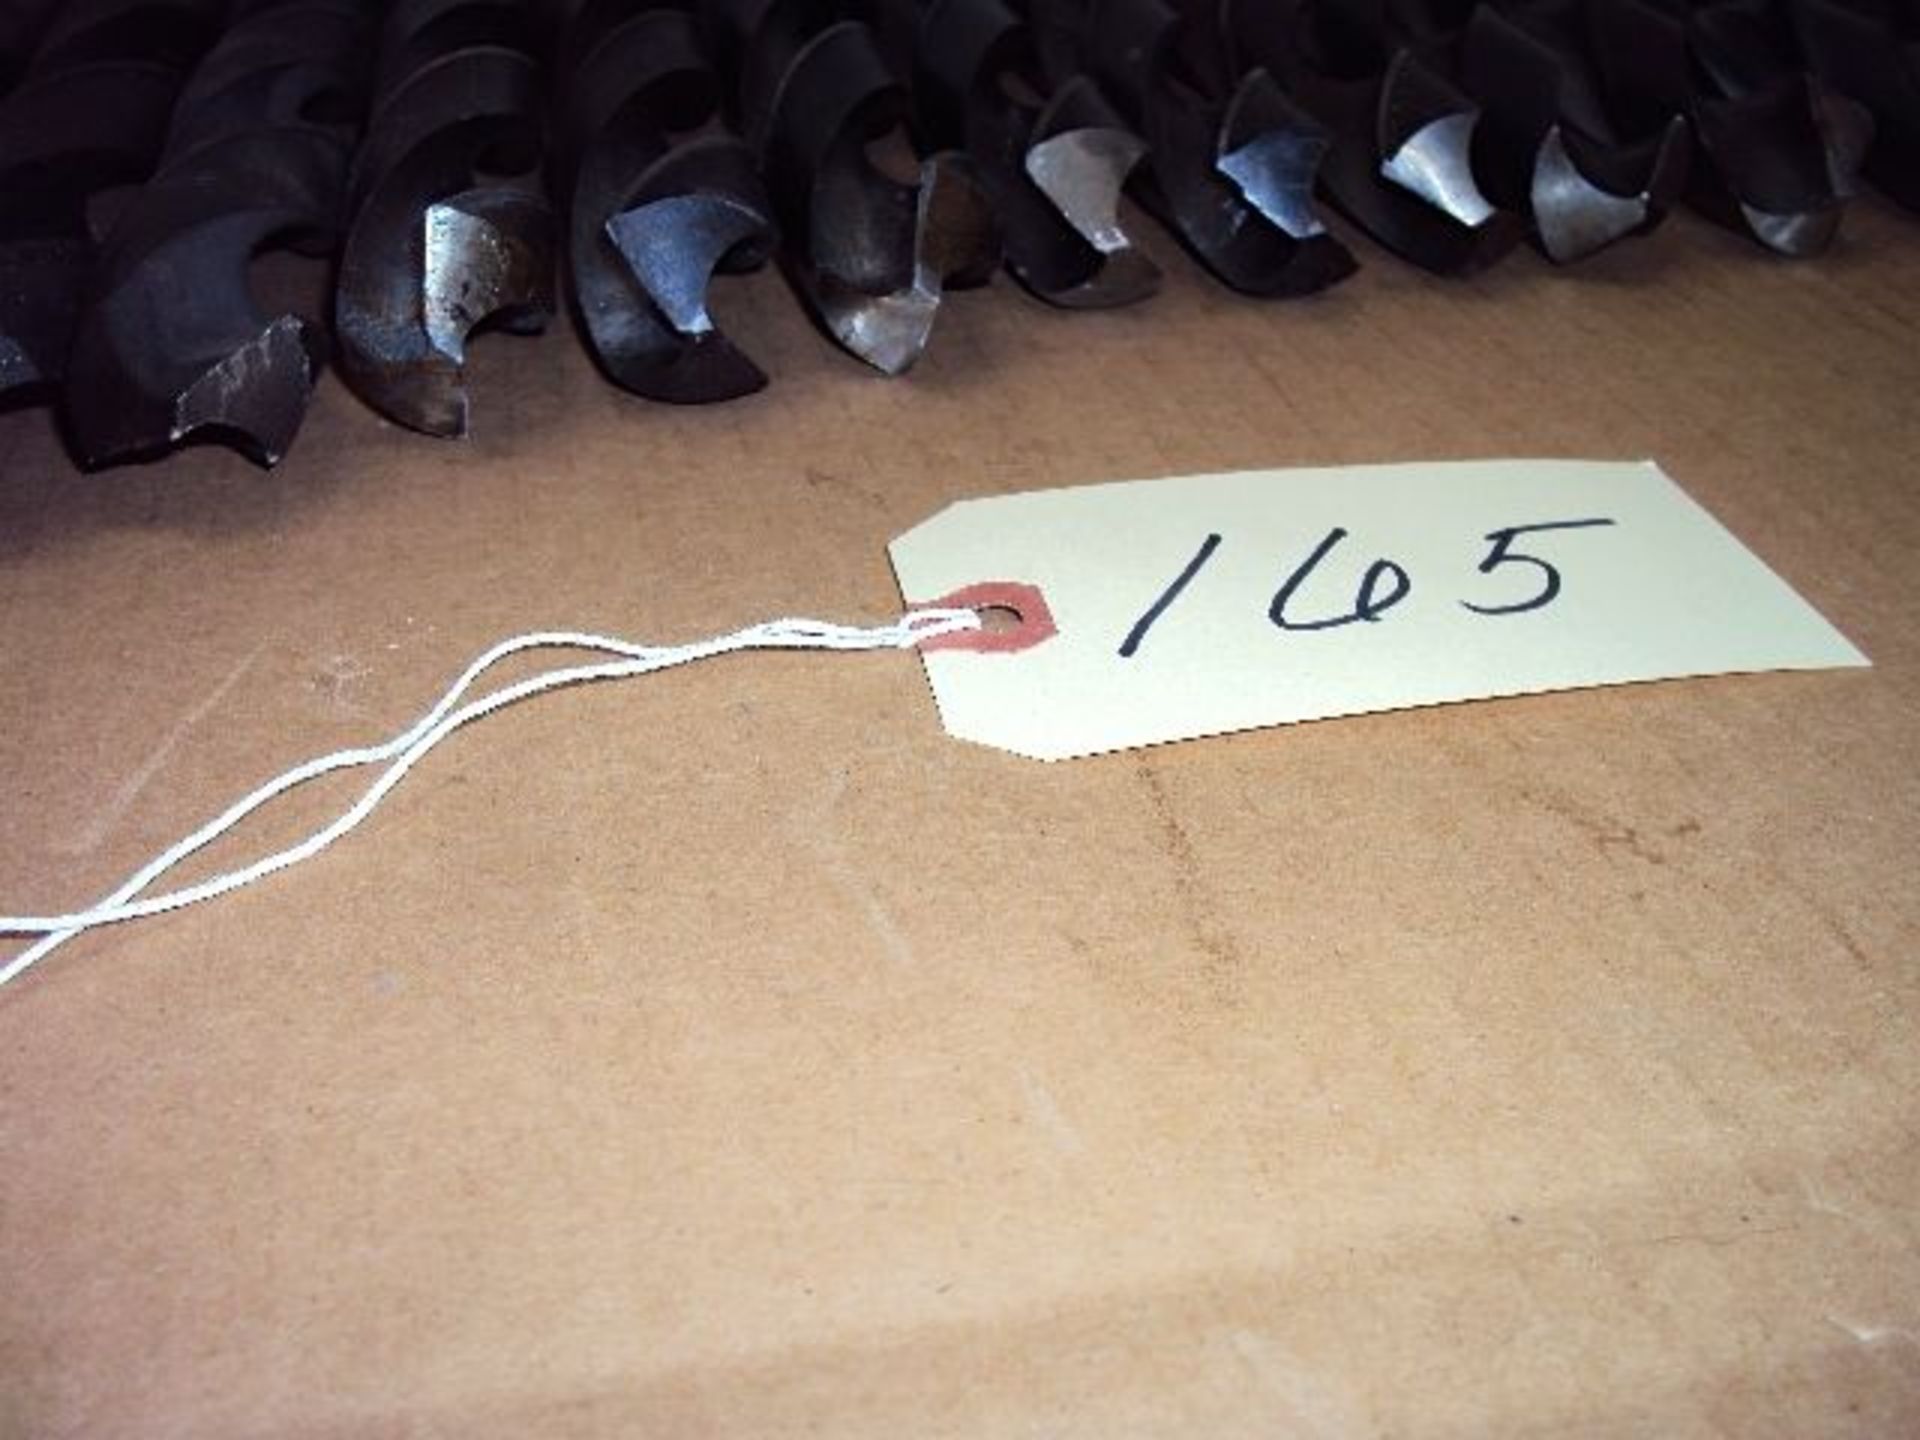 (28) MT4 Taper Shank HSS Drills 1-1/16” to 1-1/2” by 64ths - No Repeats - missing 1-17/64 - Image 4 of 5